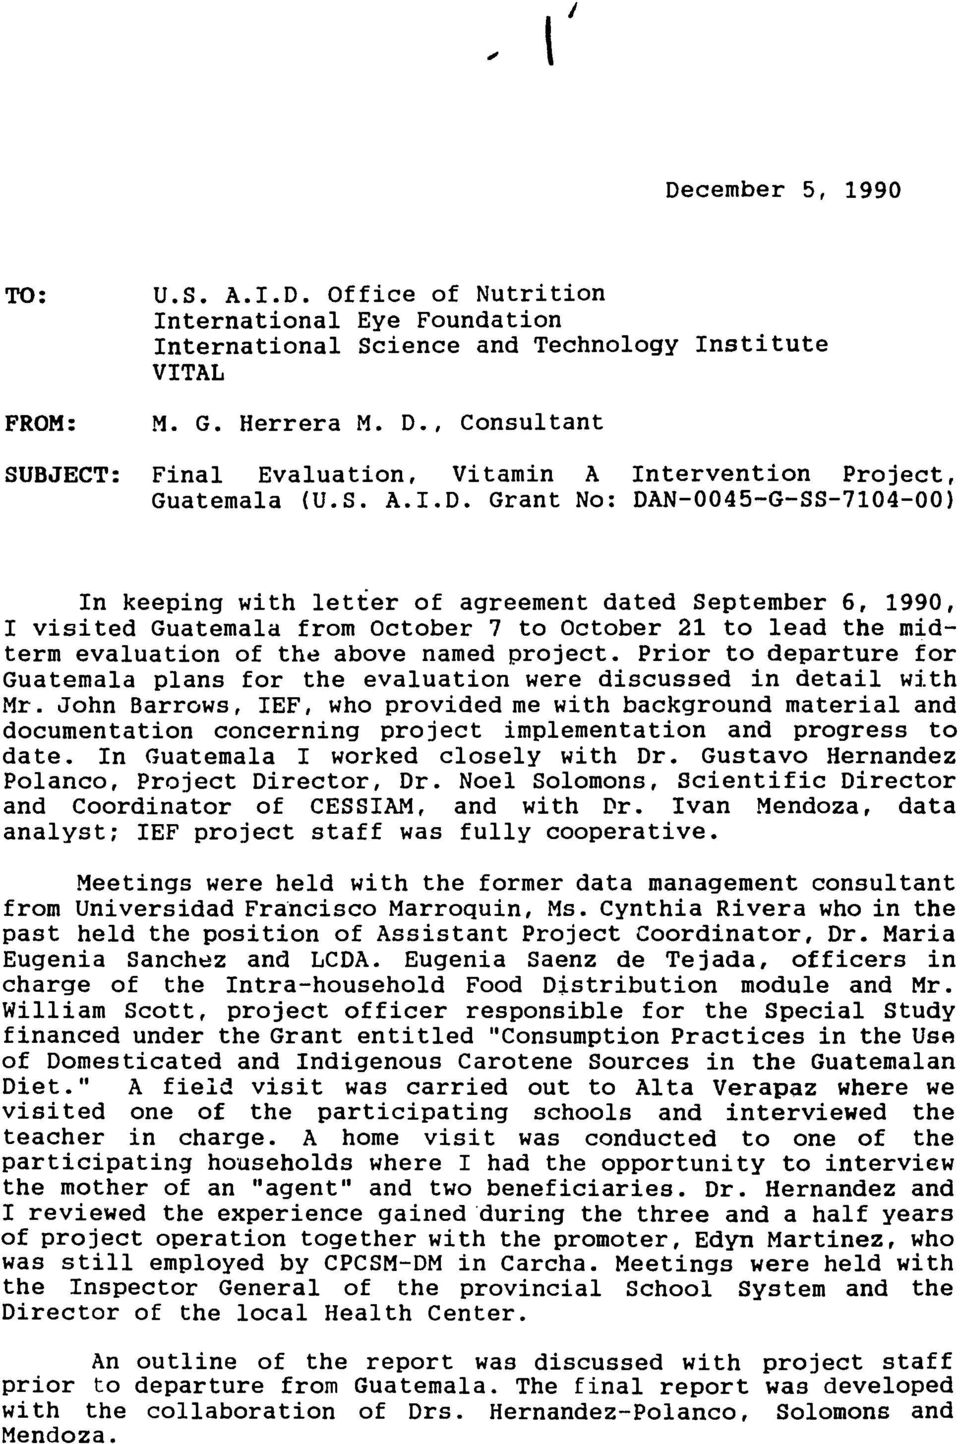 Grant No: DAN-0045-G-SS-7104-00) In keeping with letter of agreement dated September 6, 1990, I visited Guatemala from October 7 to October 21 to lead the midterm evaluation of the above named